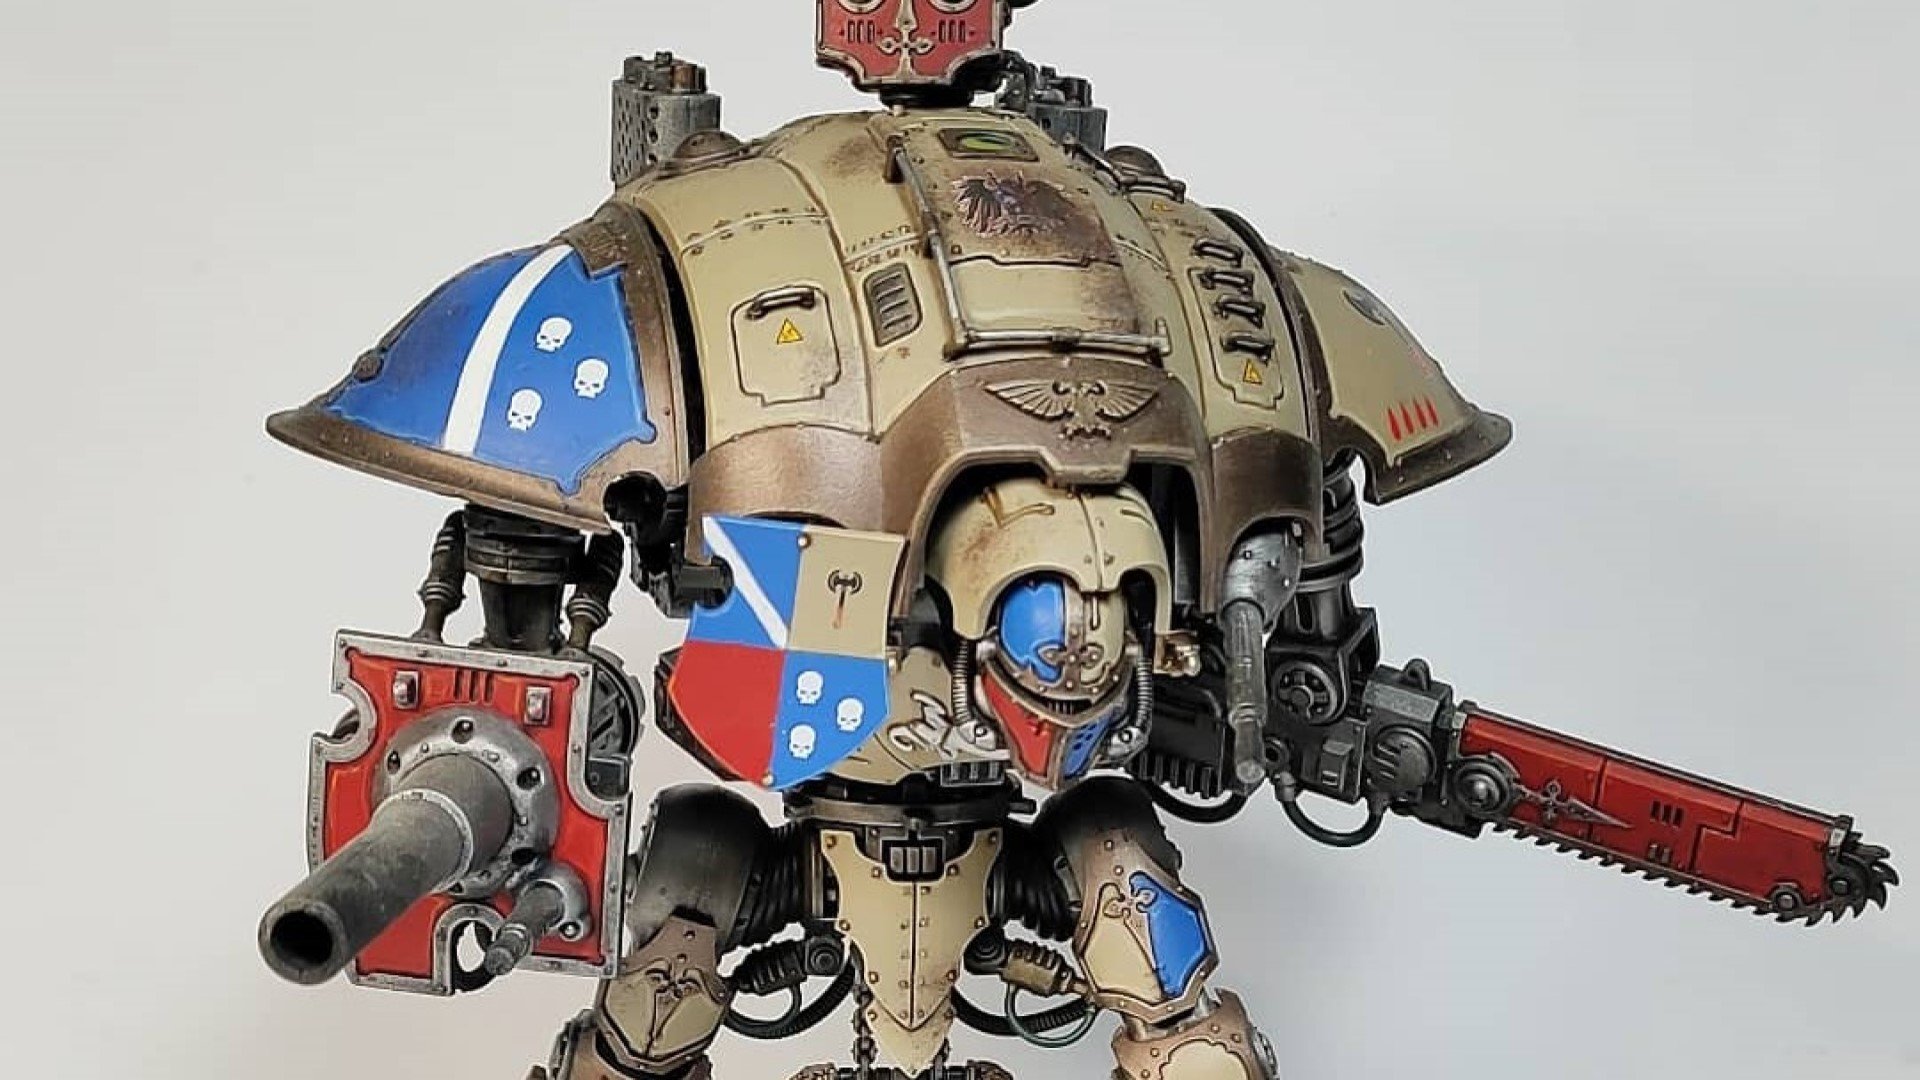 Warhammer 40k Imperial Knights army guide - Photo provided to the author by Instagram user @40ksteve showing a Knight Paladin of House Griffith